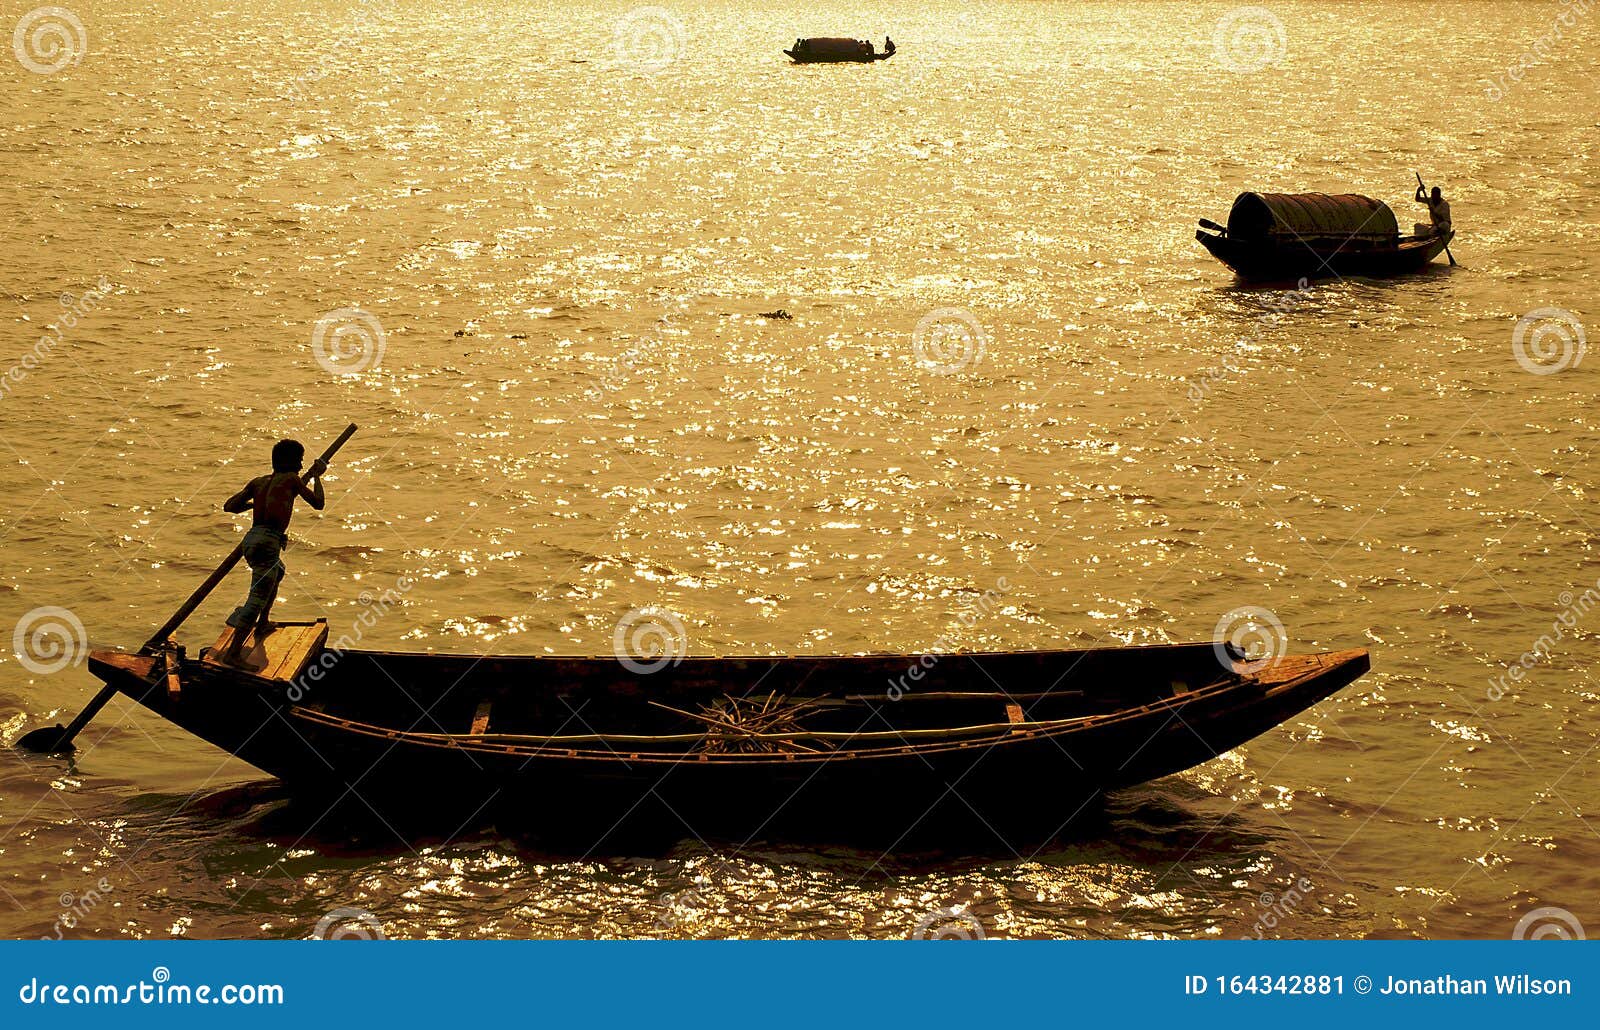 ganges delta, bangladesh: a boat being paddled on the river and silhouetted against the sun